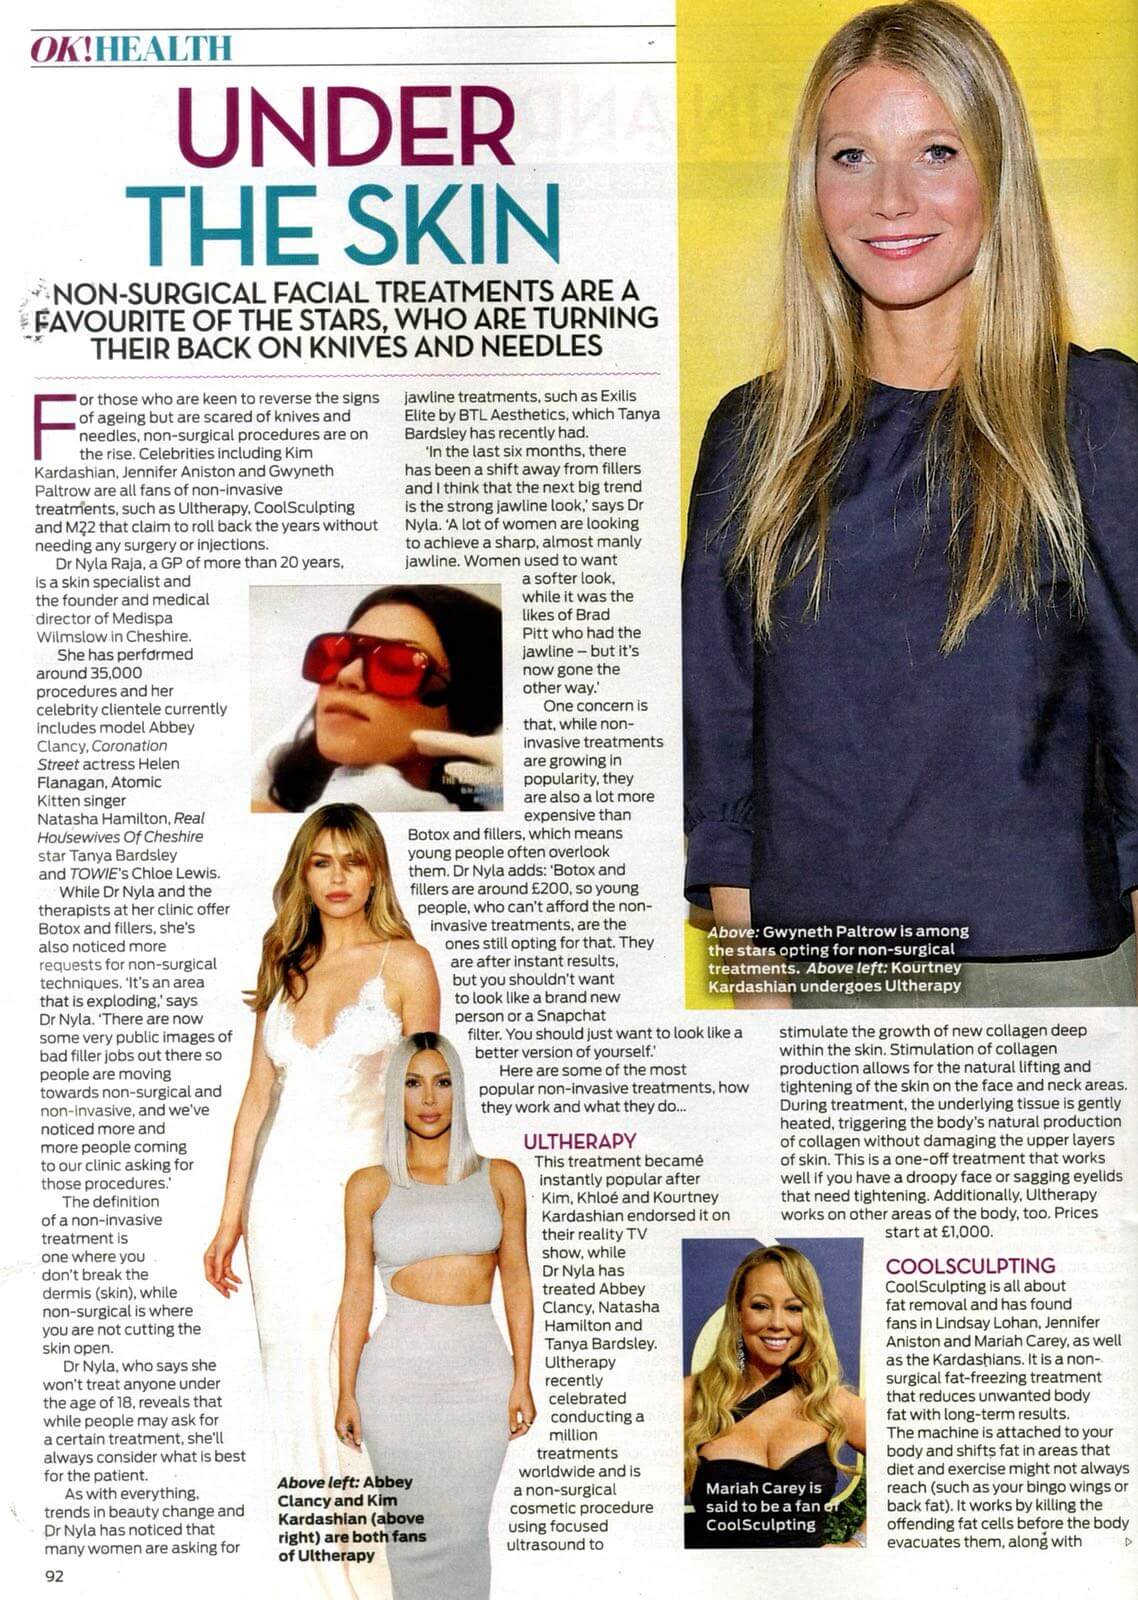 Dr Nyla article in OK magazine